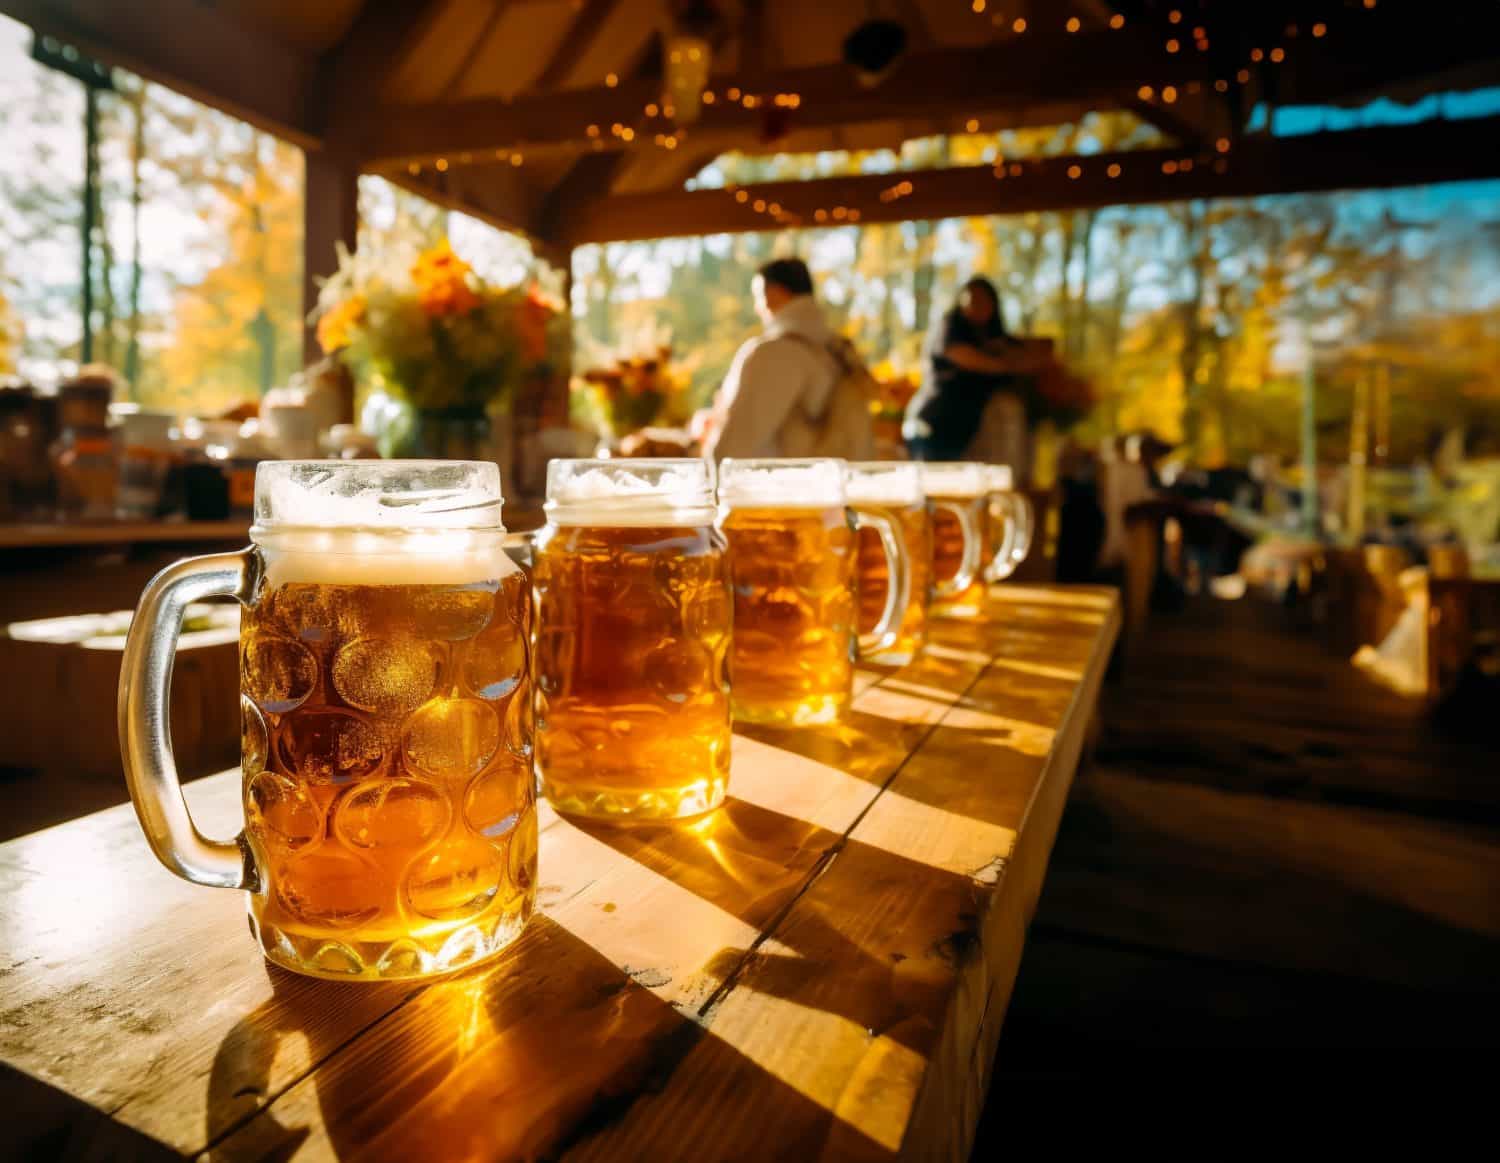 Row of larges mugs with Beer on a table in a pub, bar or October festival grounds. Concept of beer with friends and German beer festival. Shallow field of view.